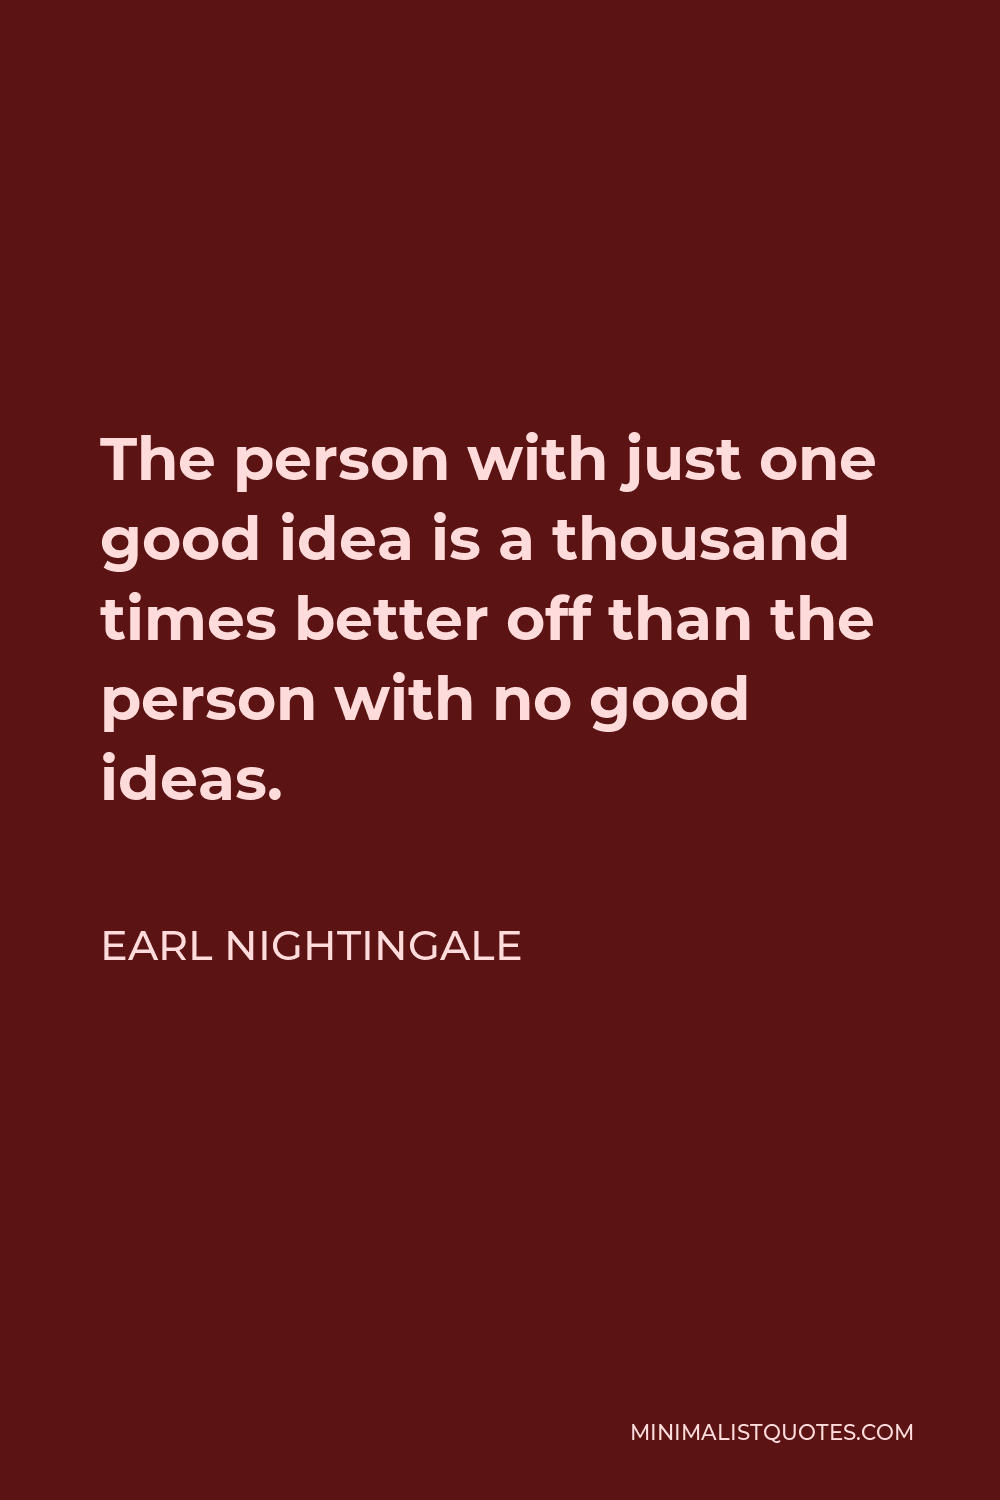 Earl Nightingale Quote - The person with just one good idea is a thousand times better off than the person with no good ideas.